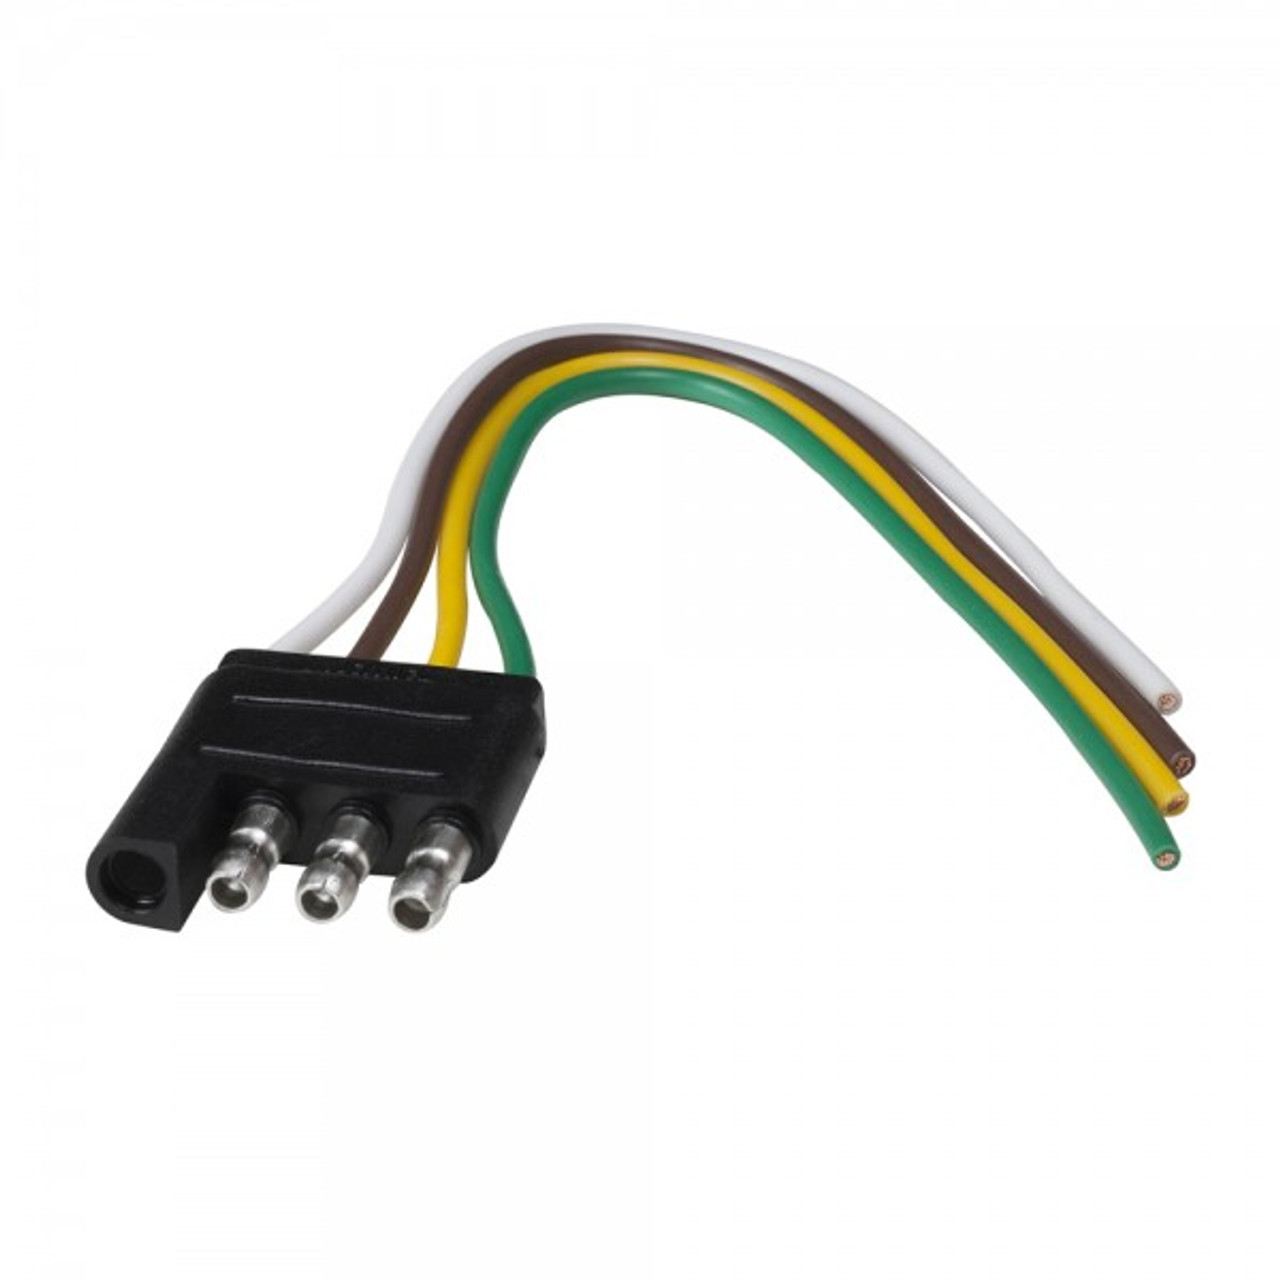 16 AWG @ 6" Flat 4 Pin Trailer Connector - Brown/Green/White/Yellow  82-1032